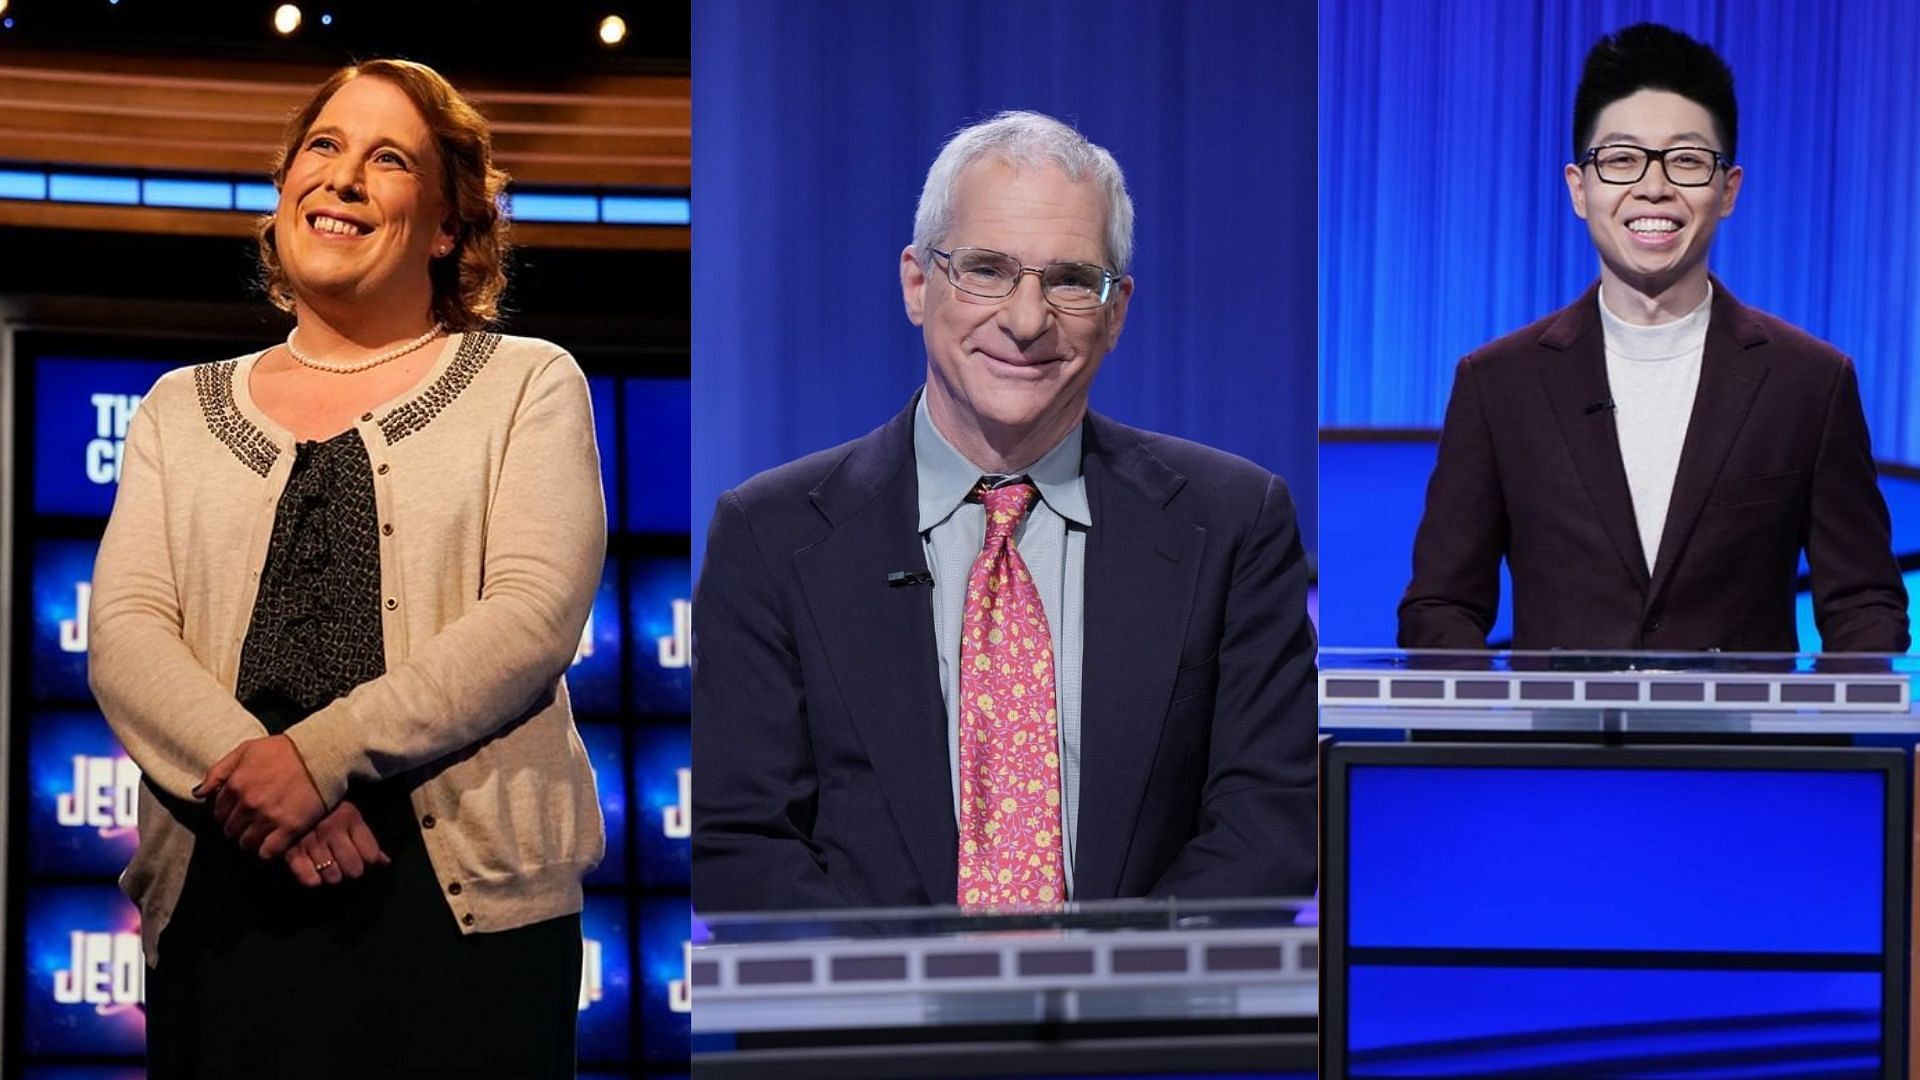 Three finalists of Jeopardy! Tournament of Champions 2022